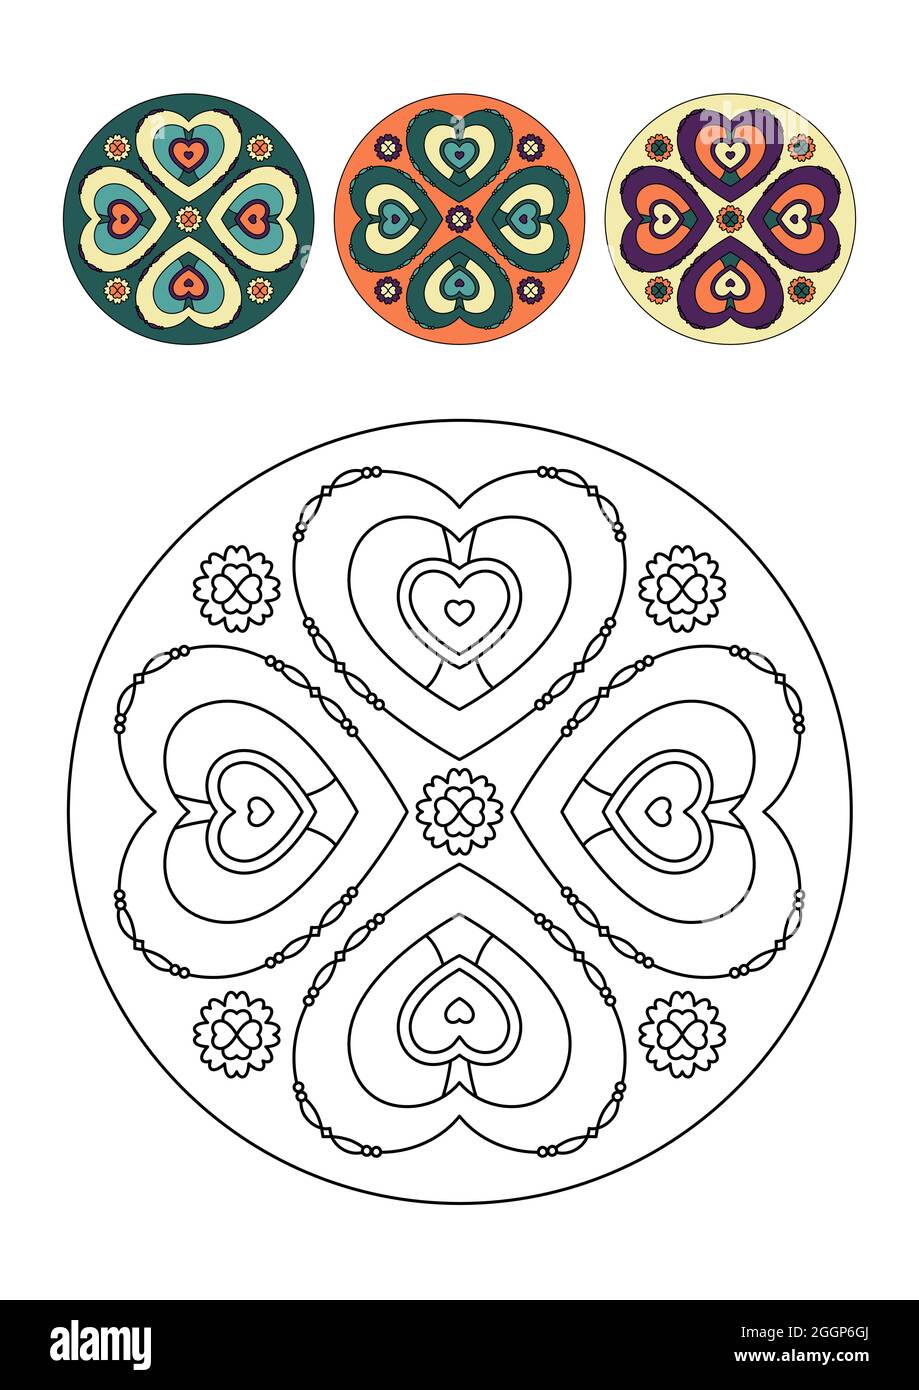 Mandala for kids with shapes of hearts. Vector illustration. Stock Vector